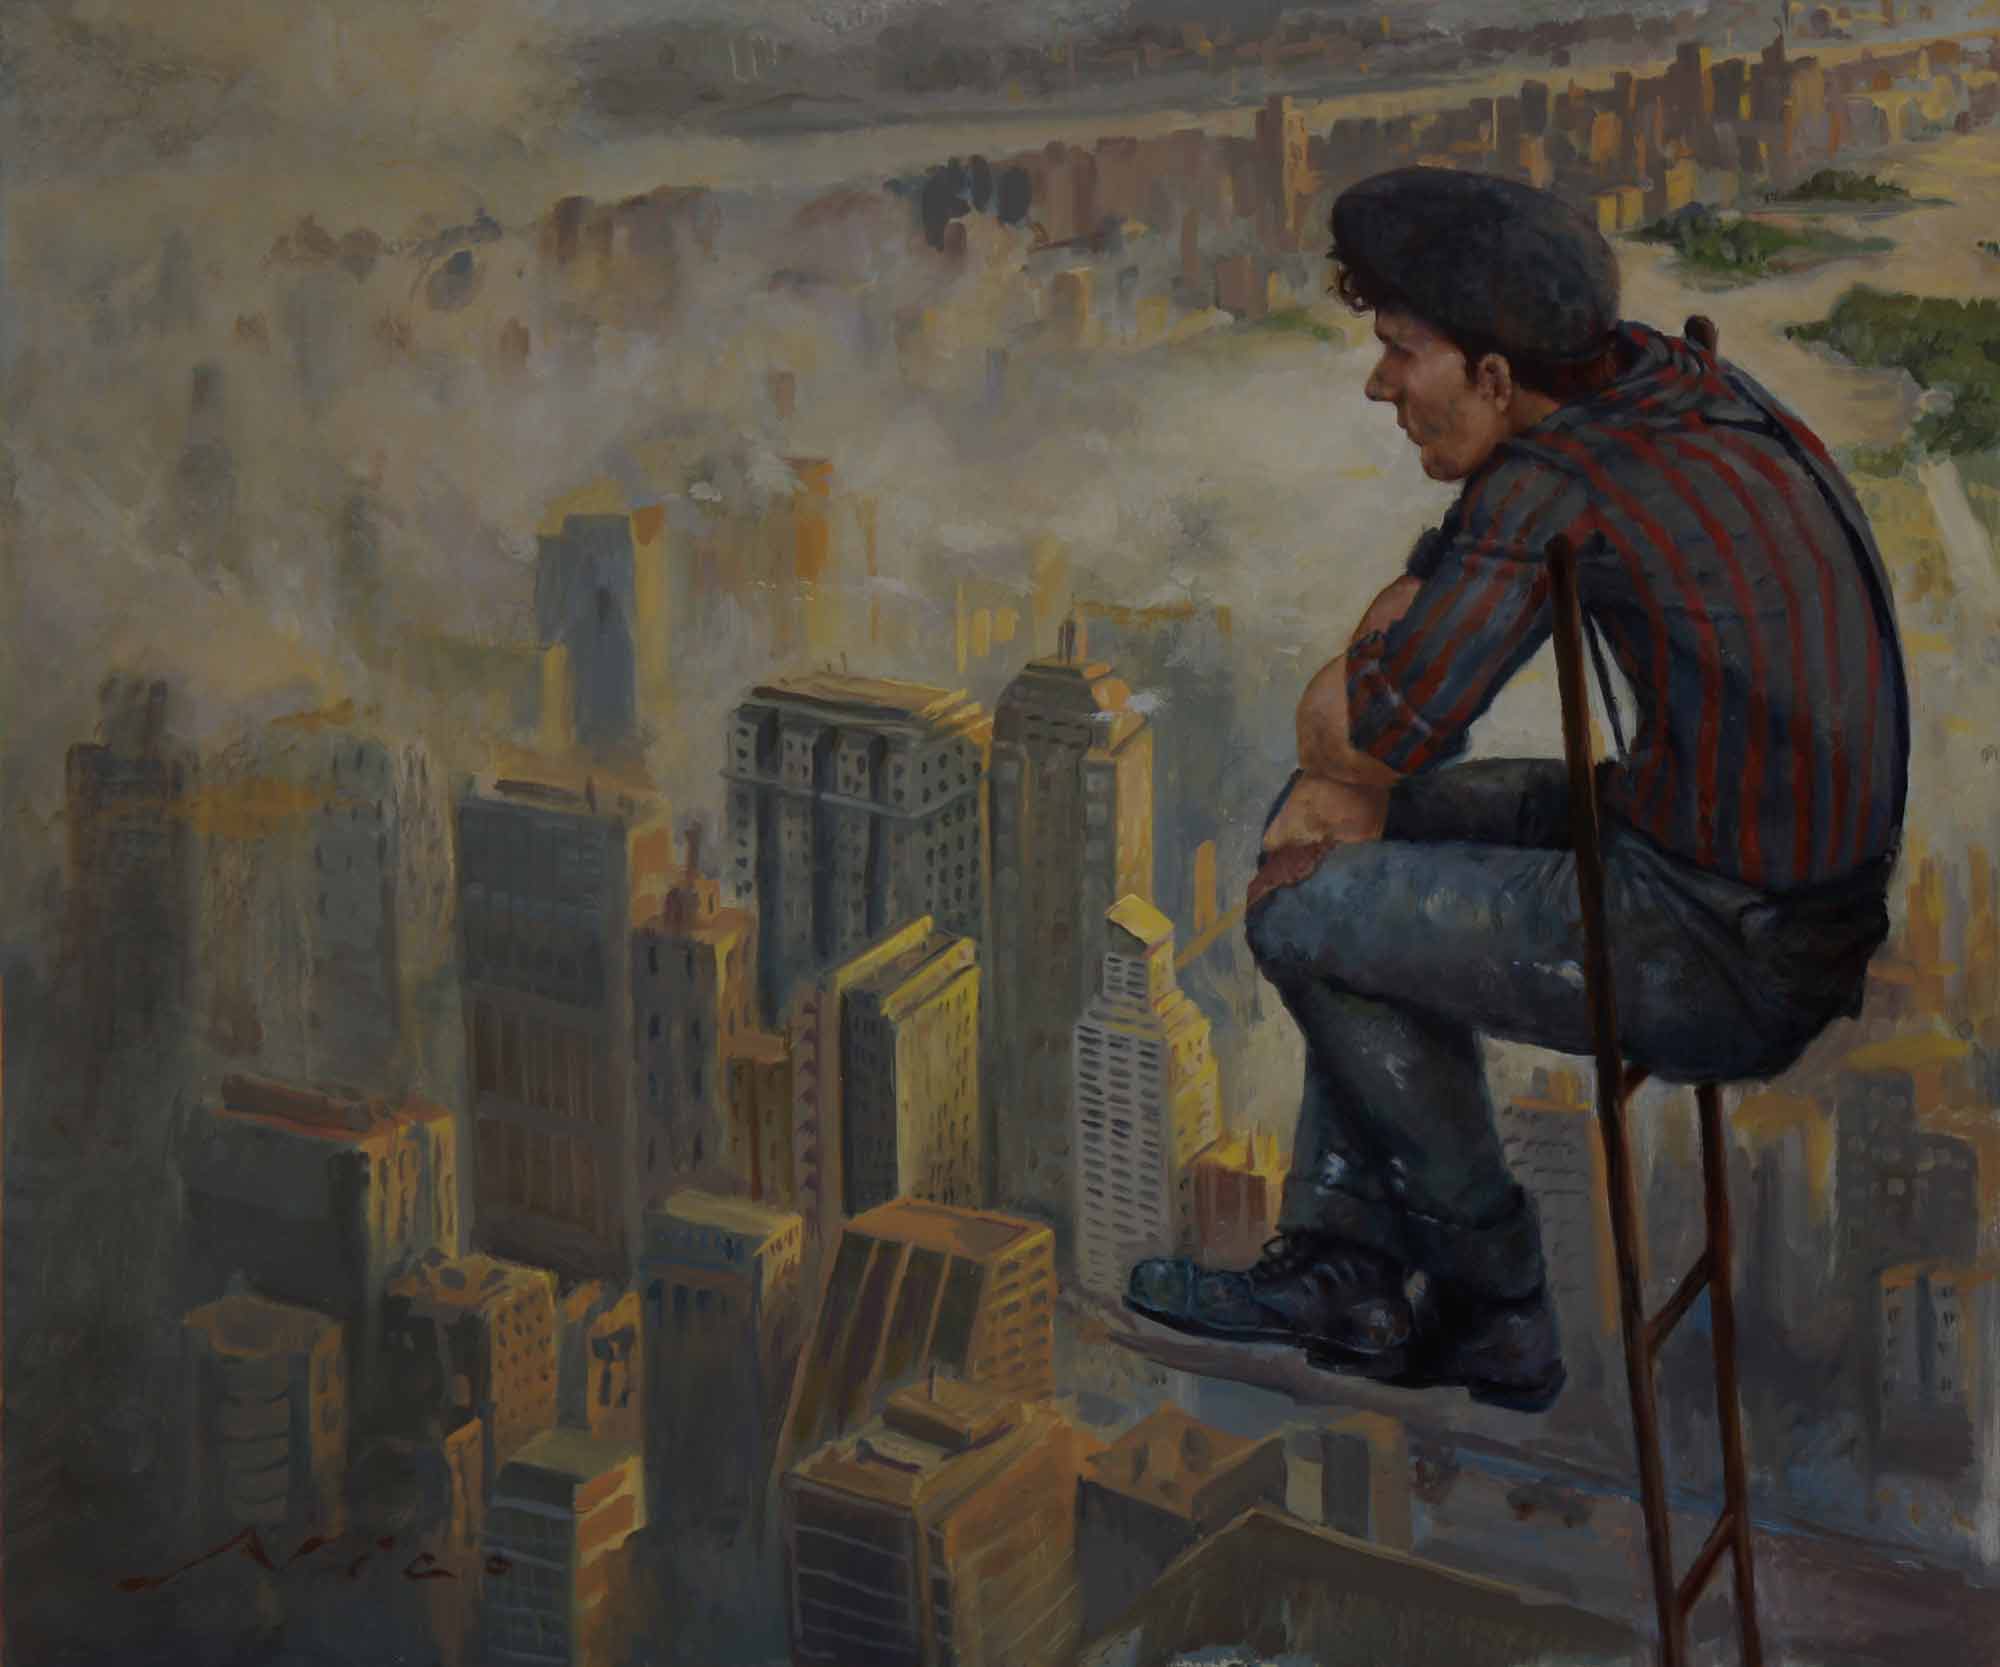 Man sitting on ladder above new york sky scrapers high up looking out, escape - Surreal Magic Realism Artwork by Fine Artist Nico